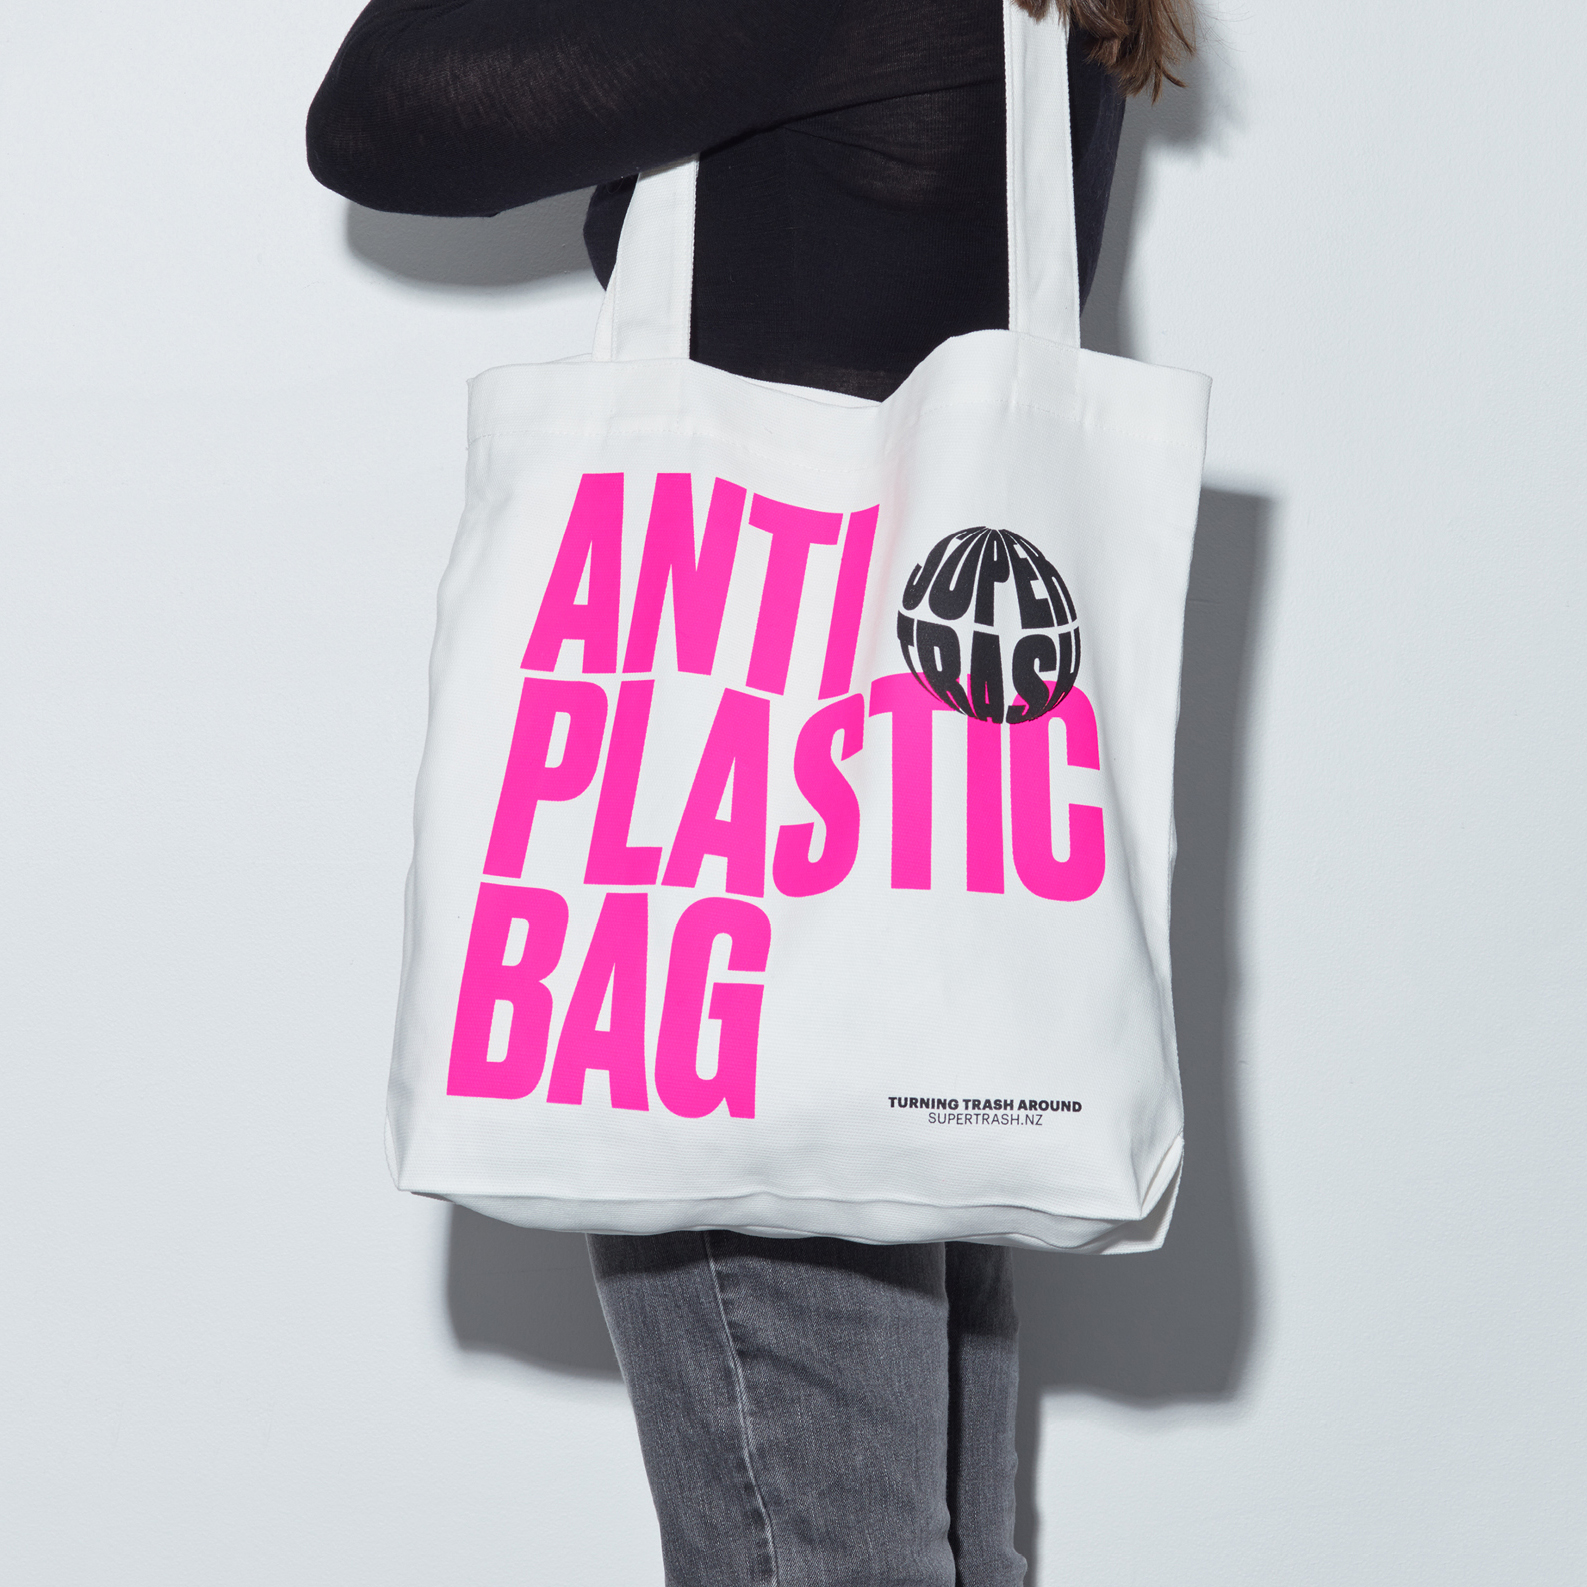 Logo and branded tote bag by Seachange for refuse collection and reuse company Supertrash